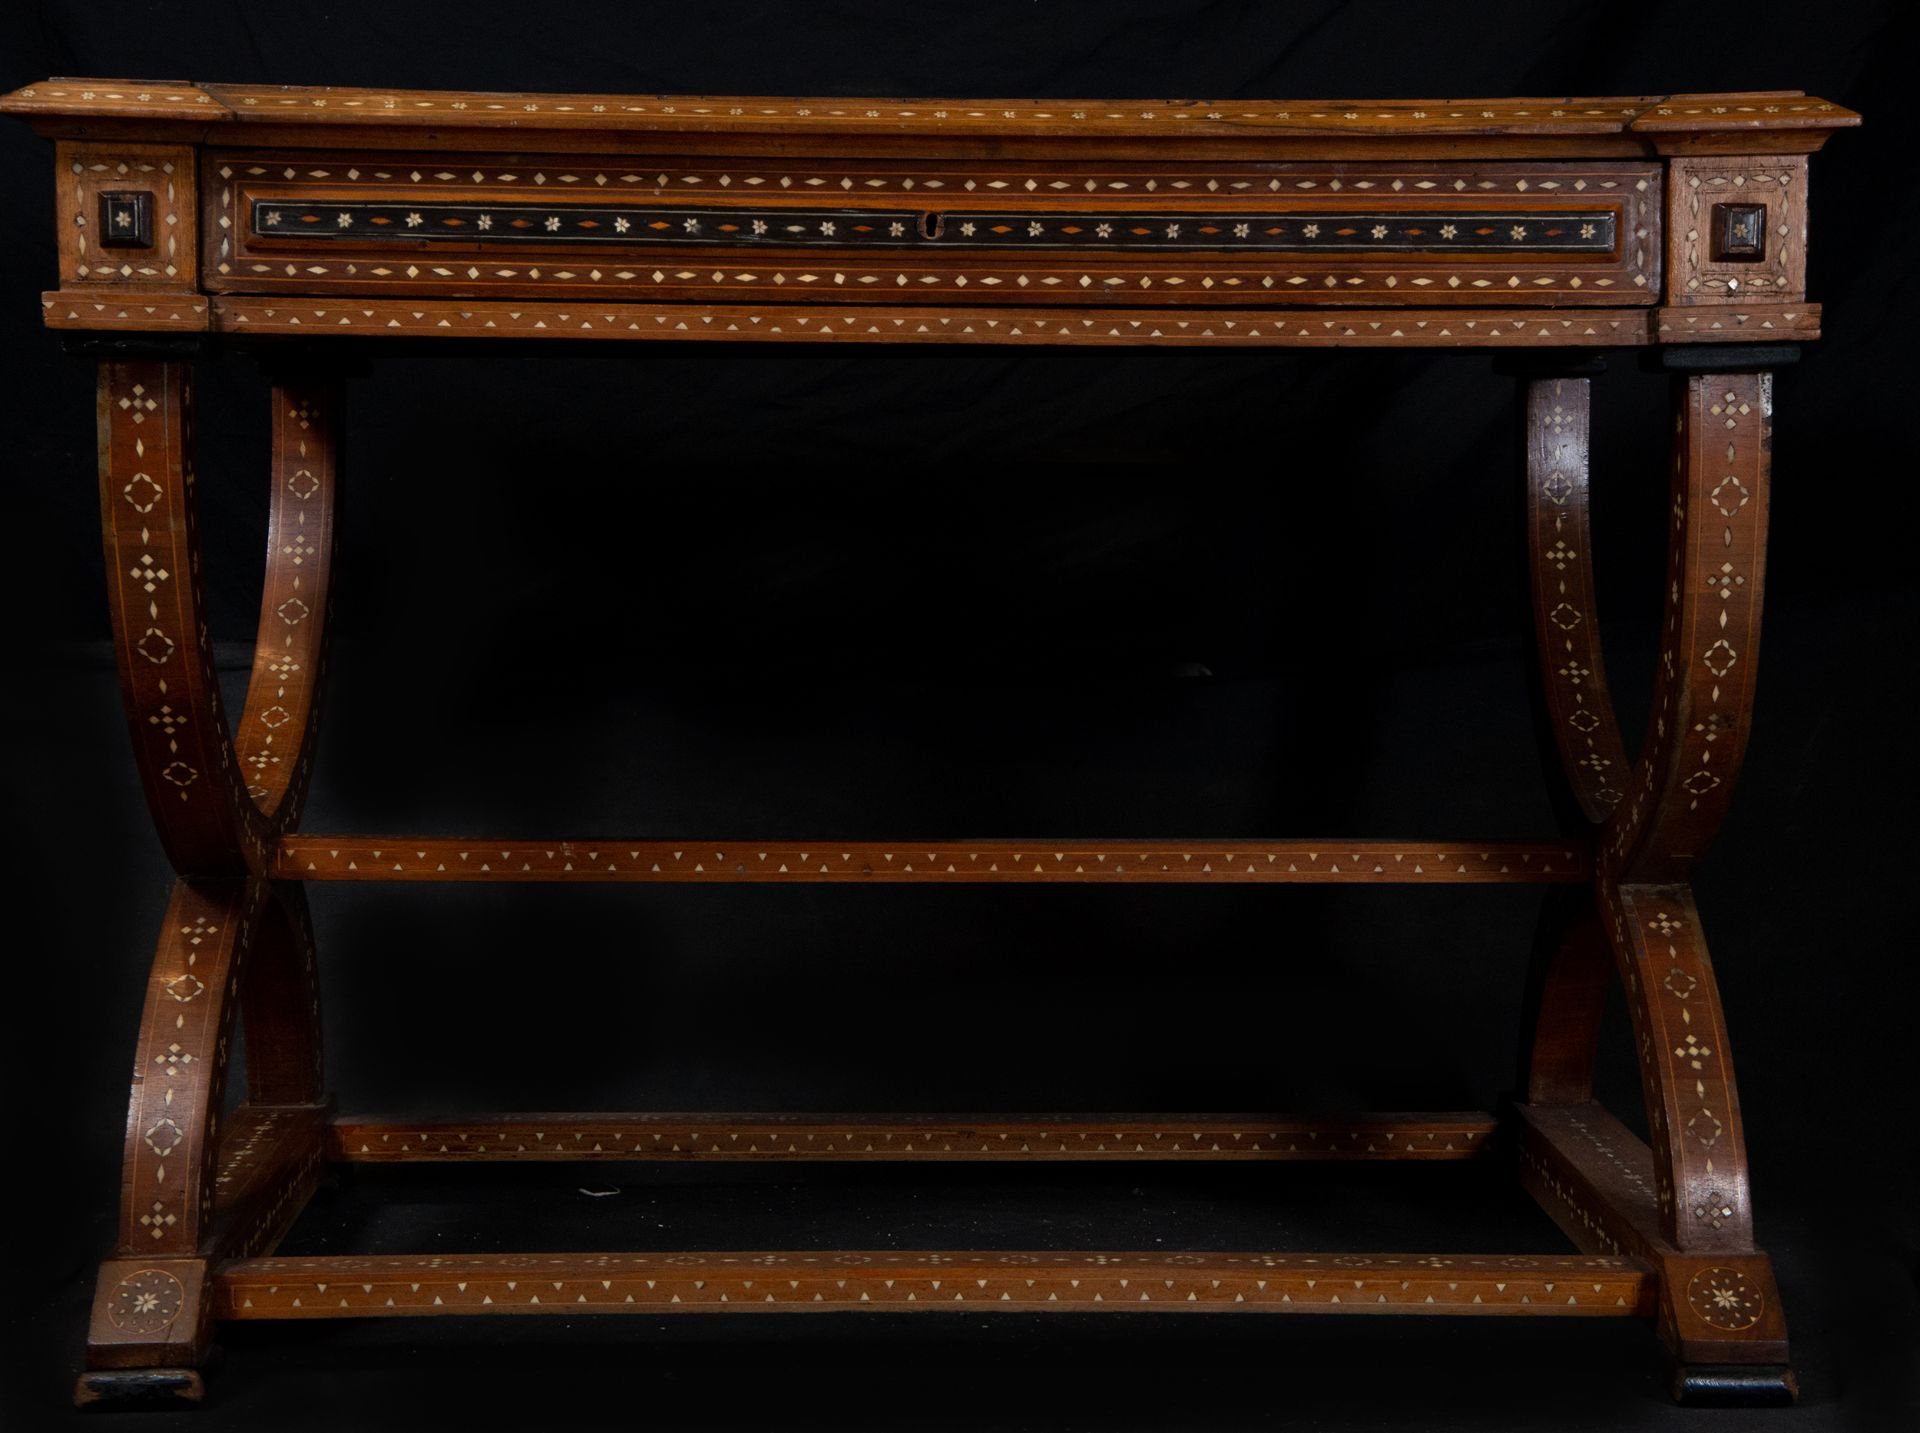 Exceptional Piedmontese Table in Bone inlay, Italian work of the 18th century